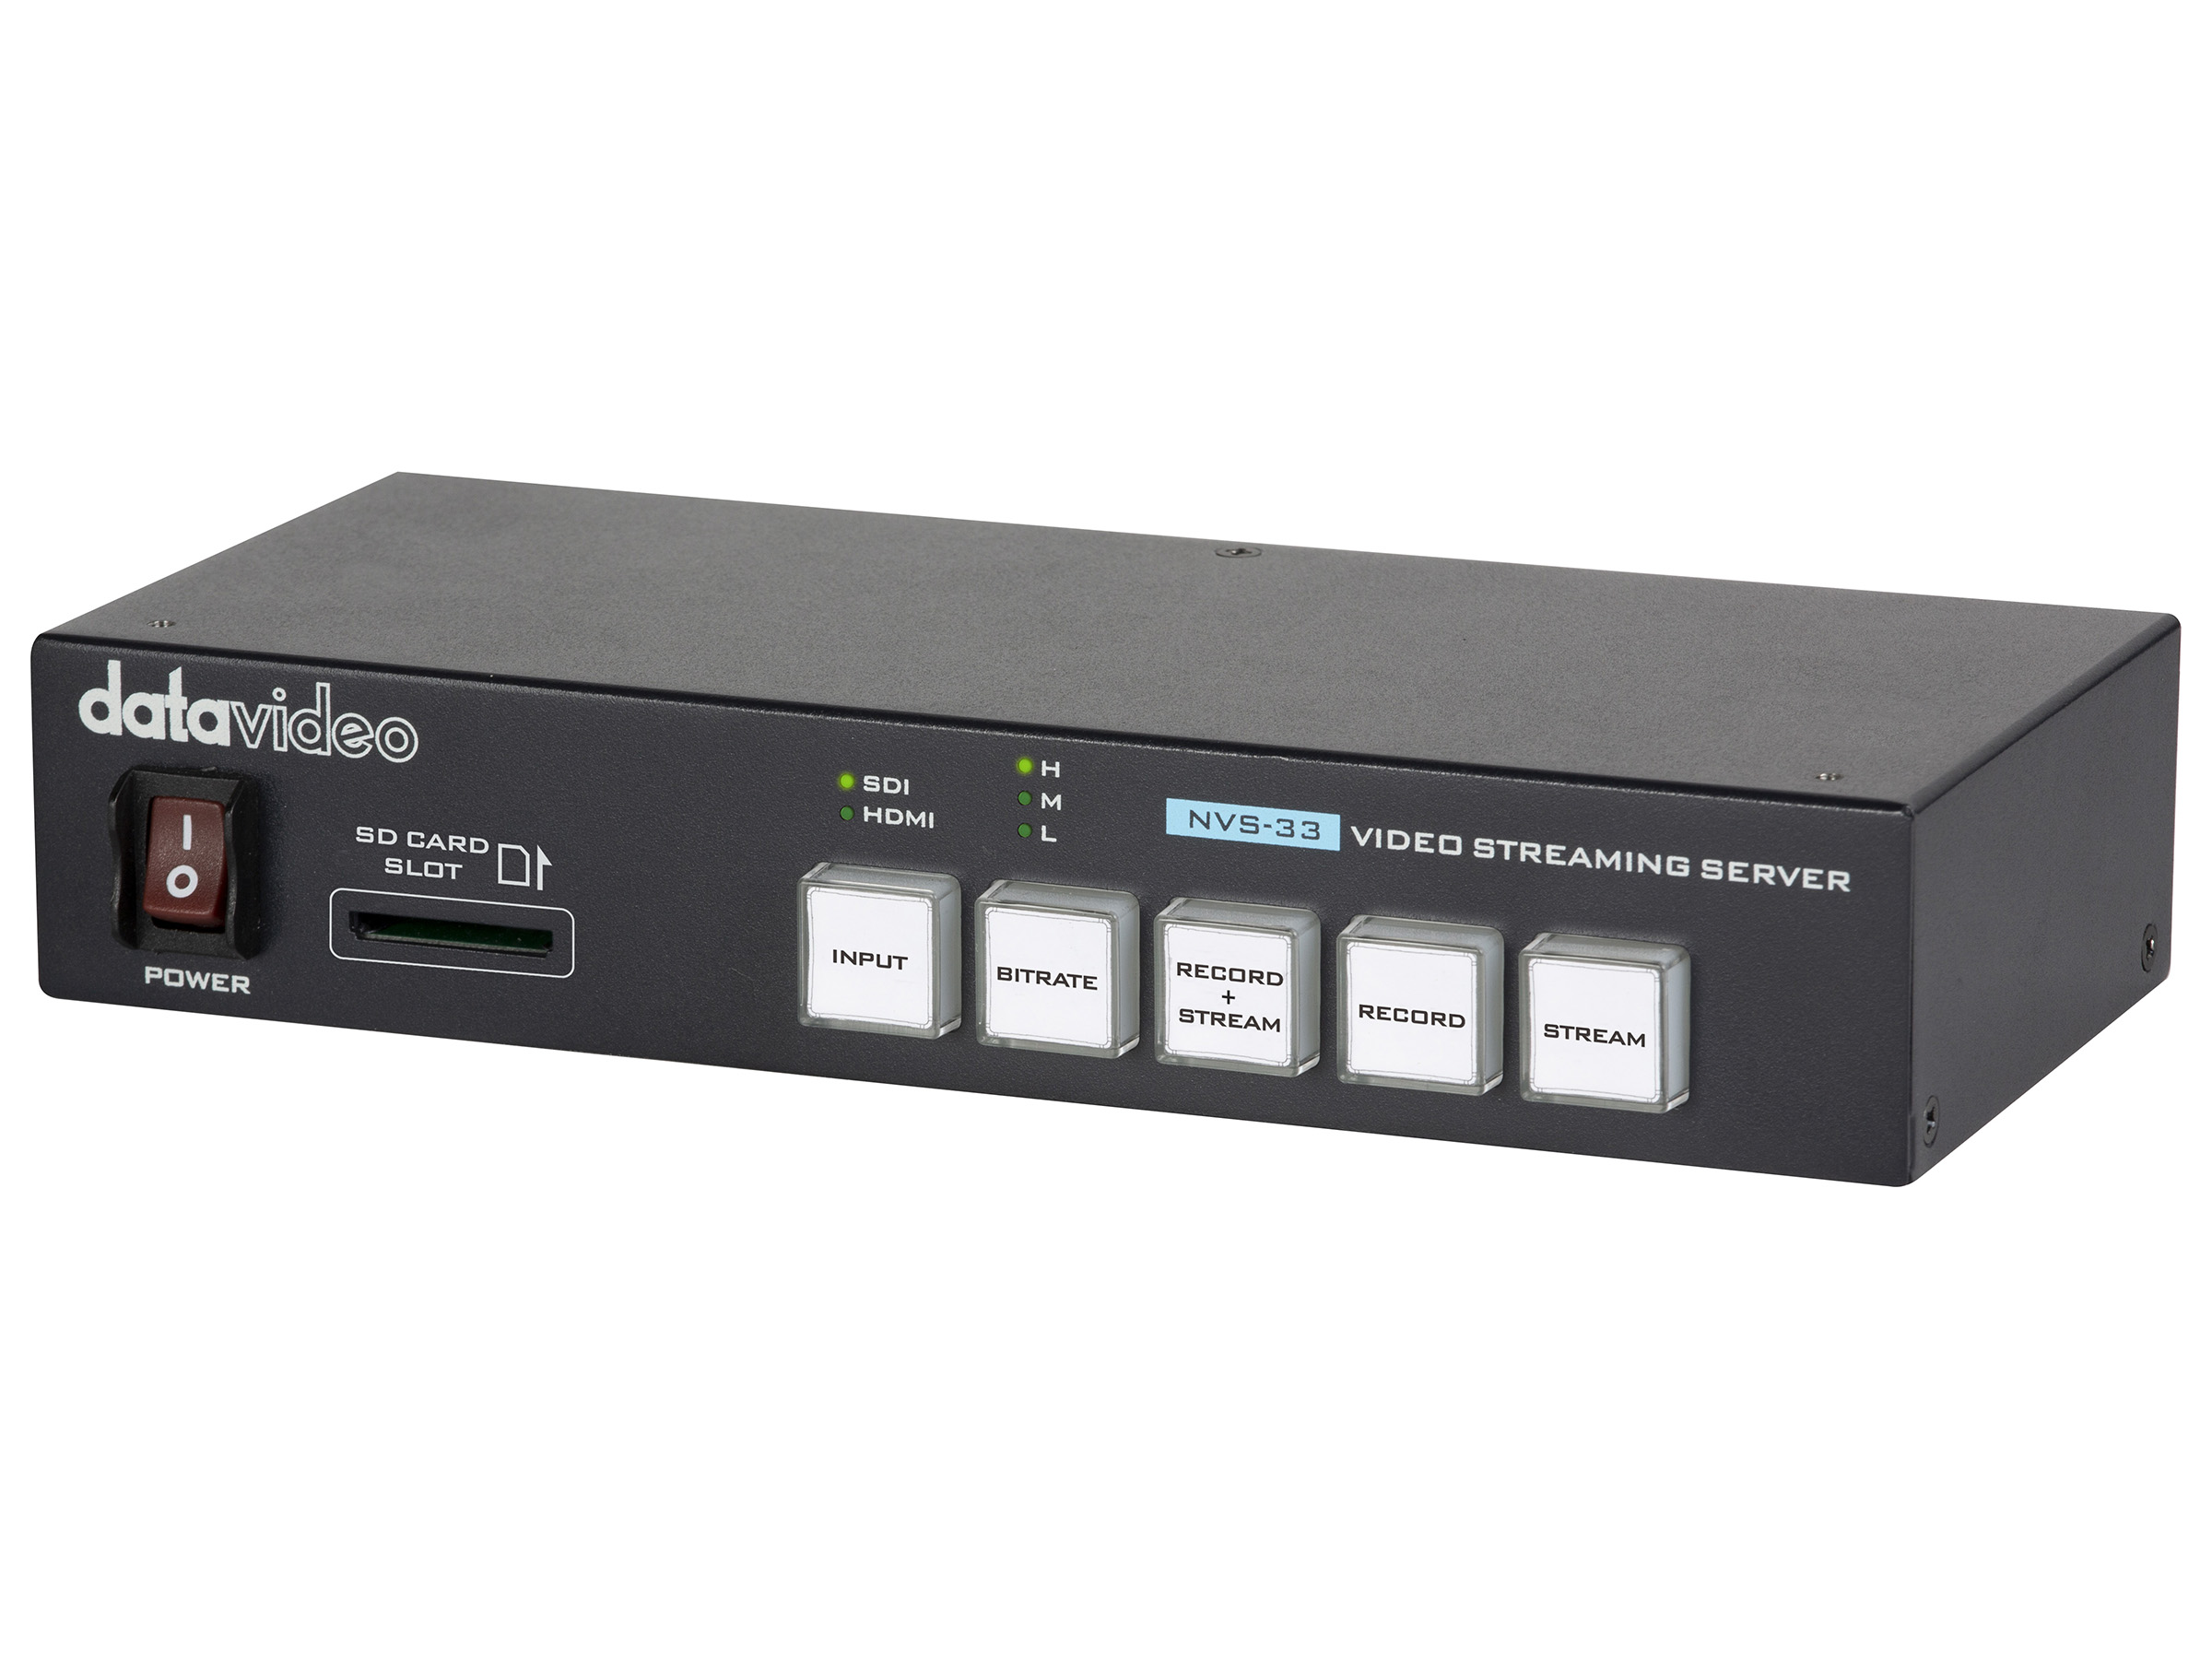 NVS-33 H.264 Video Streaming Encoder and MP4 Recorder by Datavideo